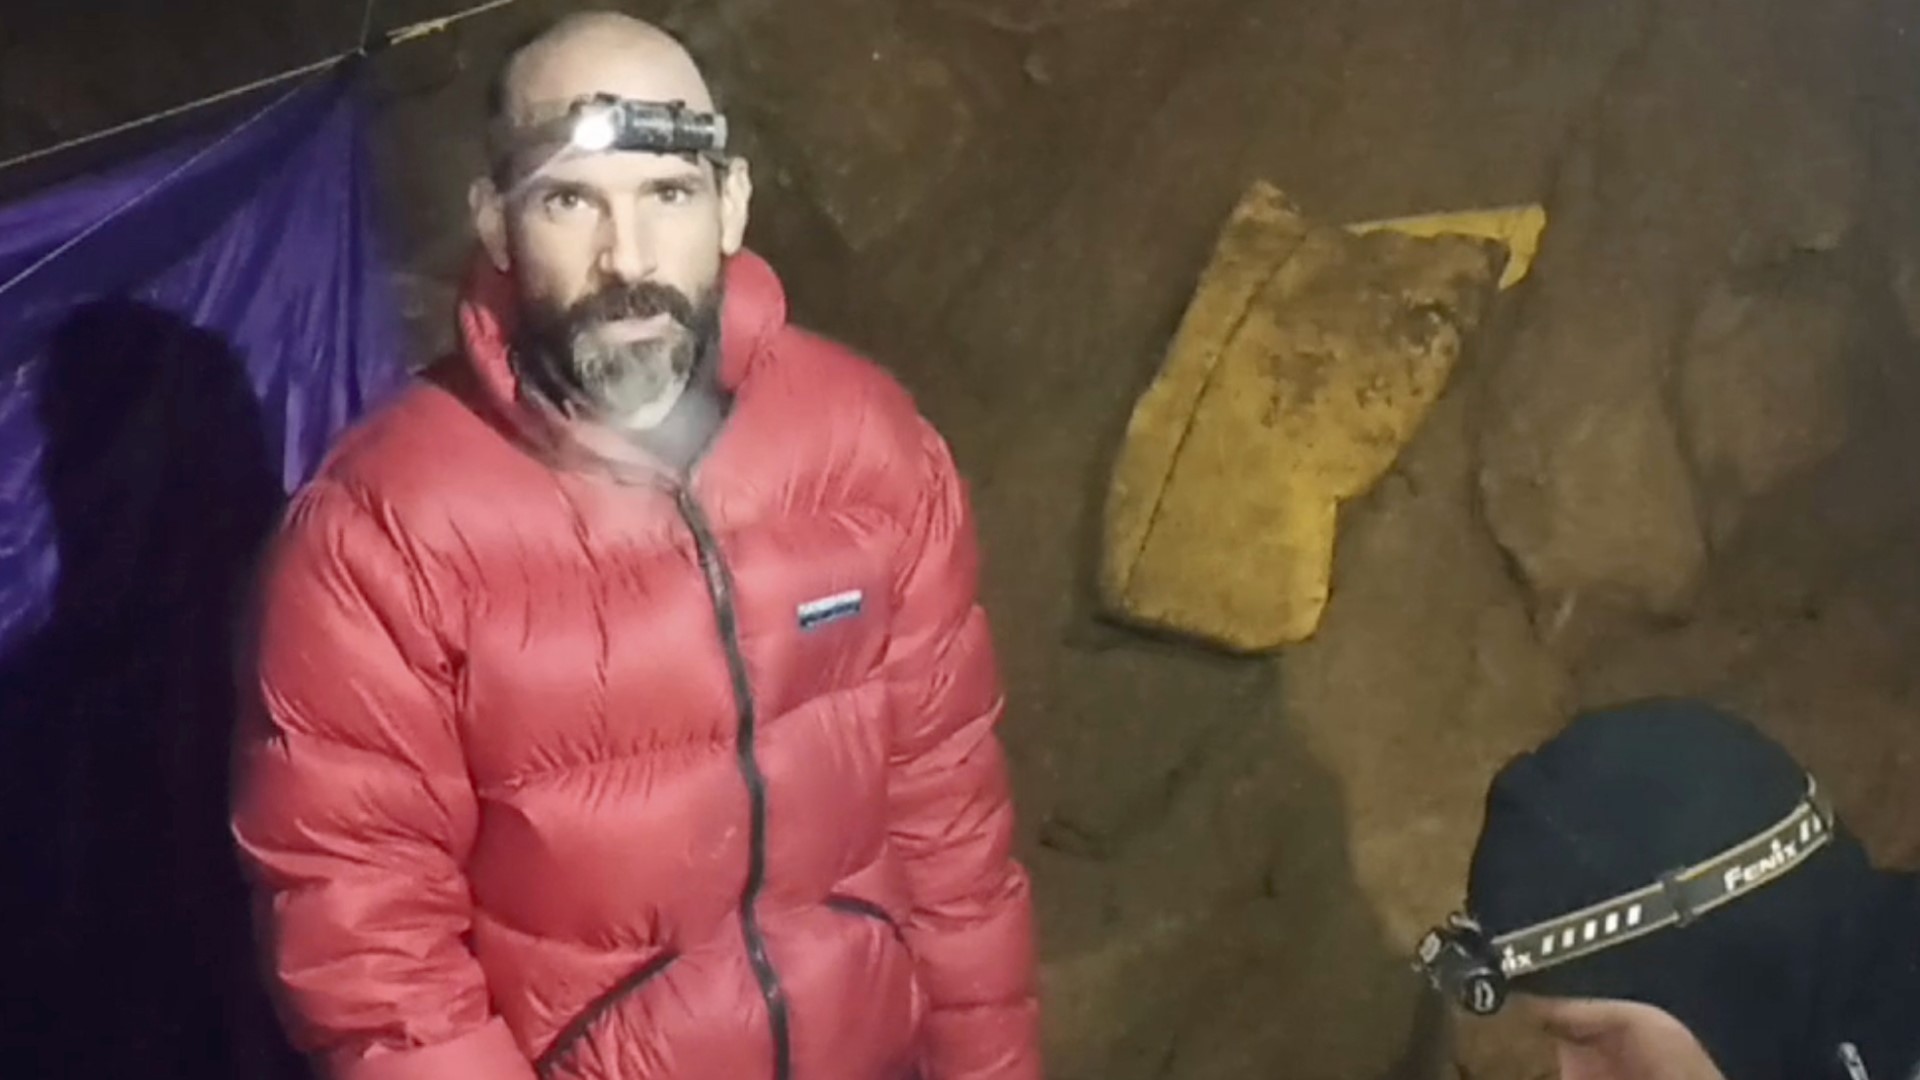 In a video message from inside the cave, American Mark Dickey says he was "very close to the edge" when medical supplies reached him 3,000 feet below the surface.